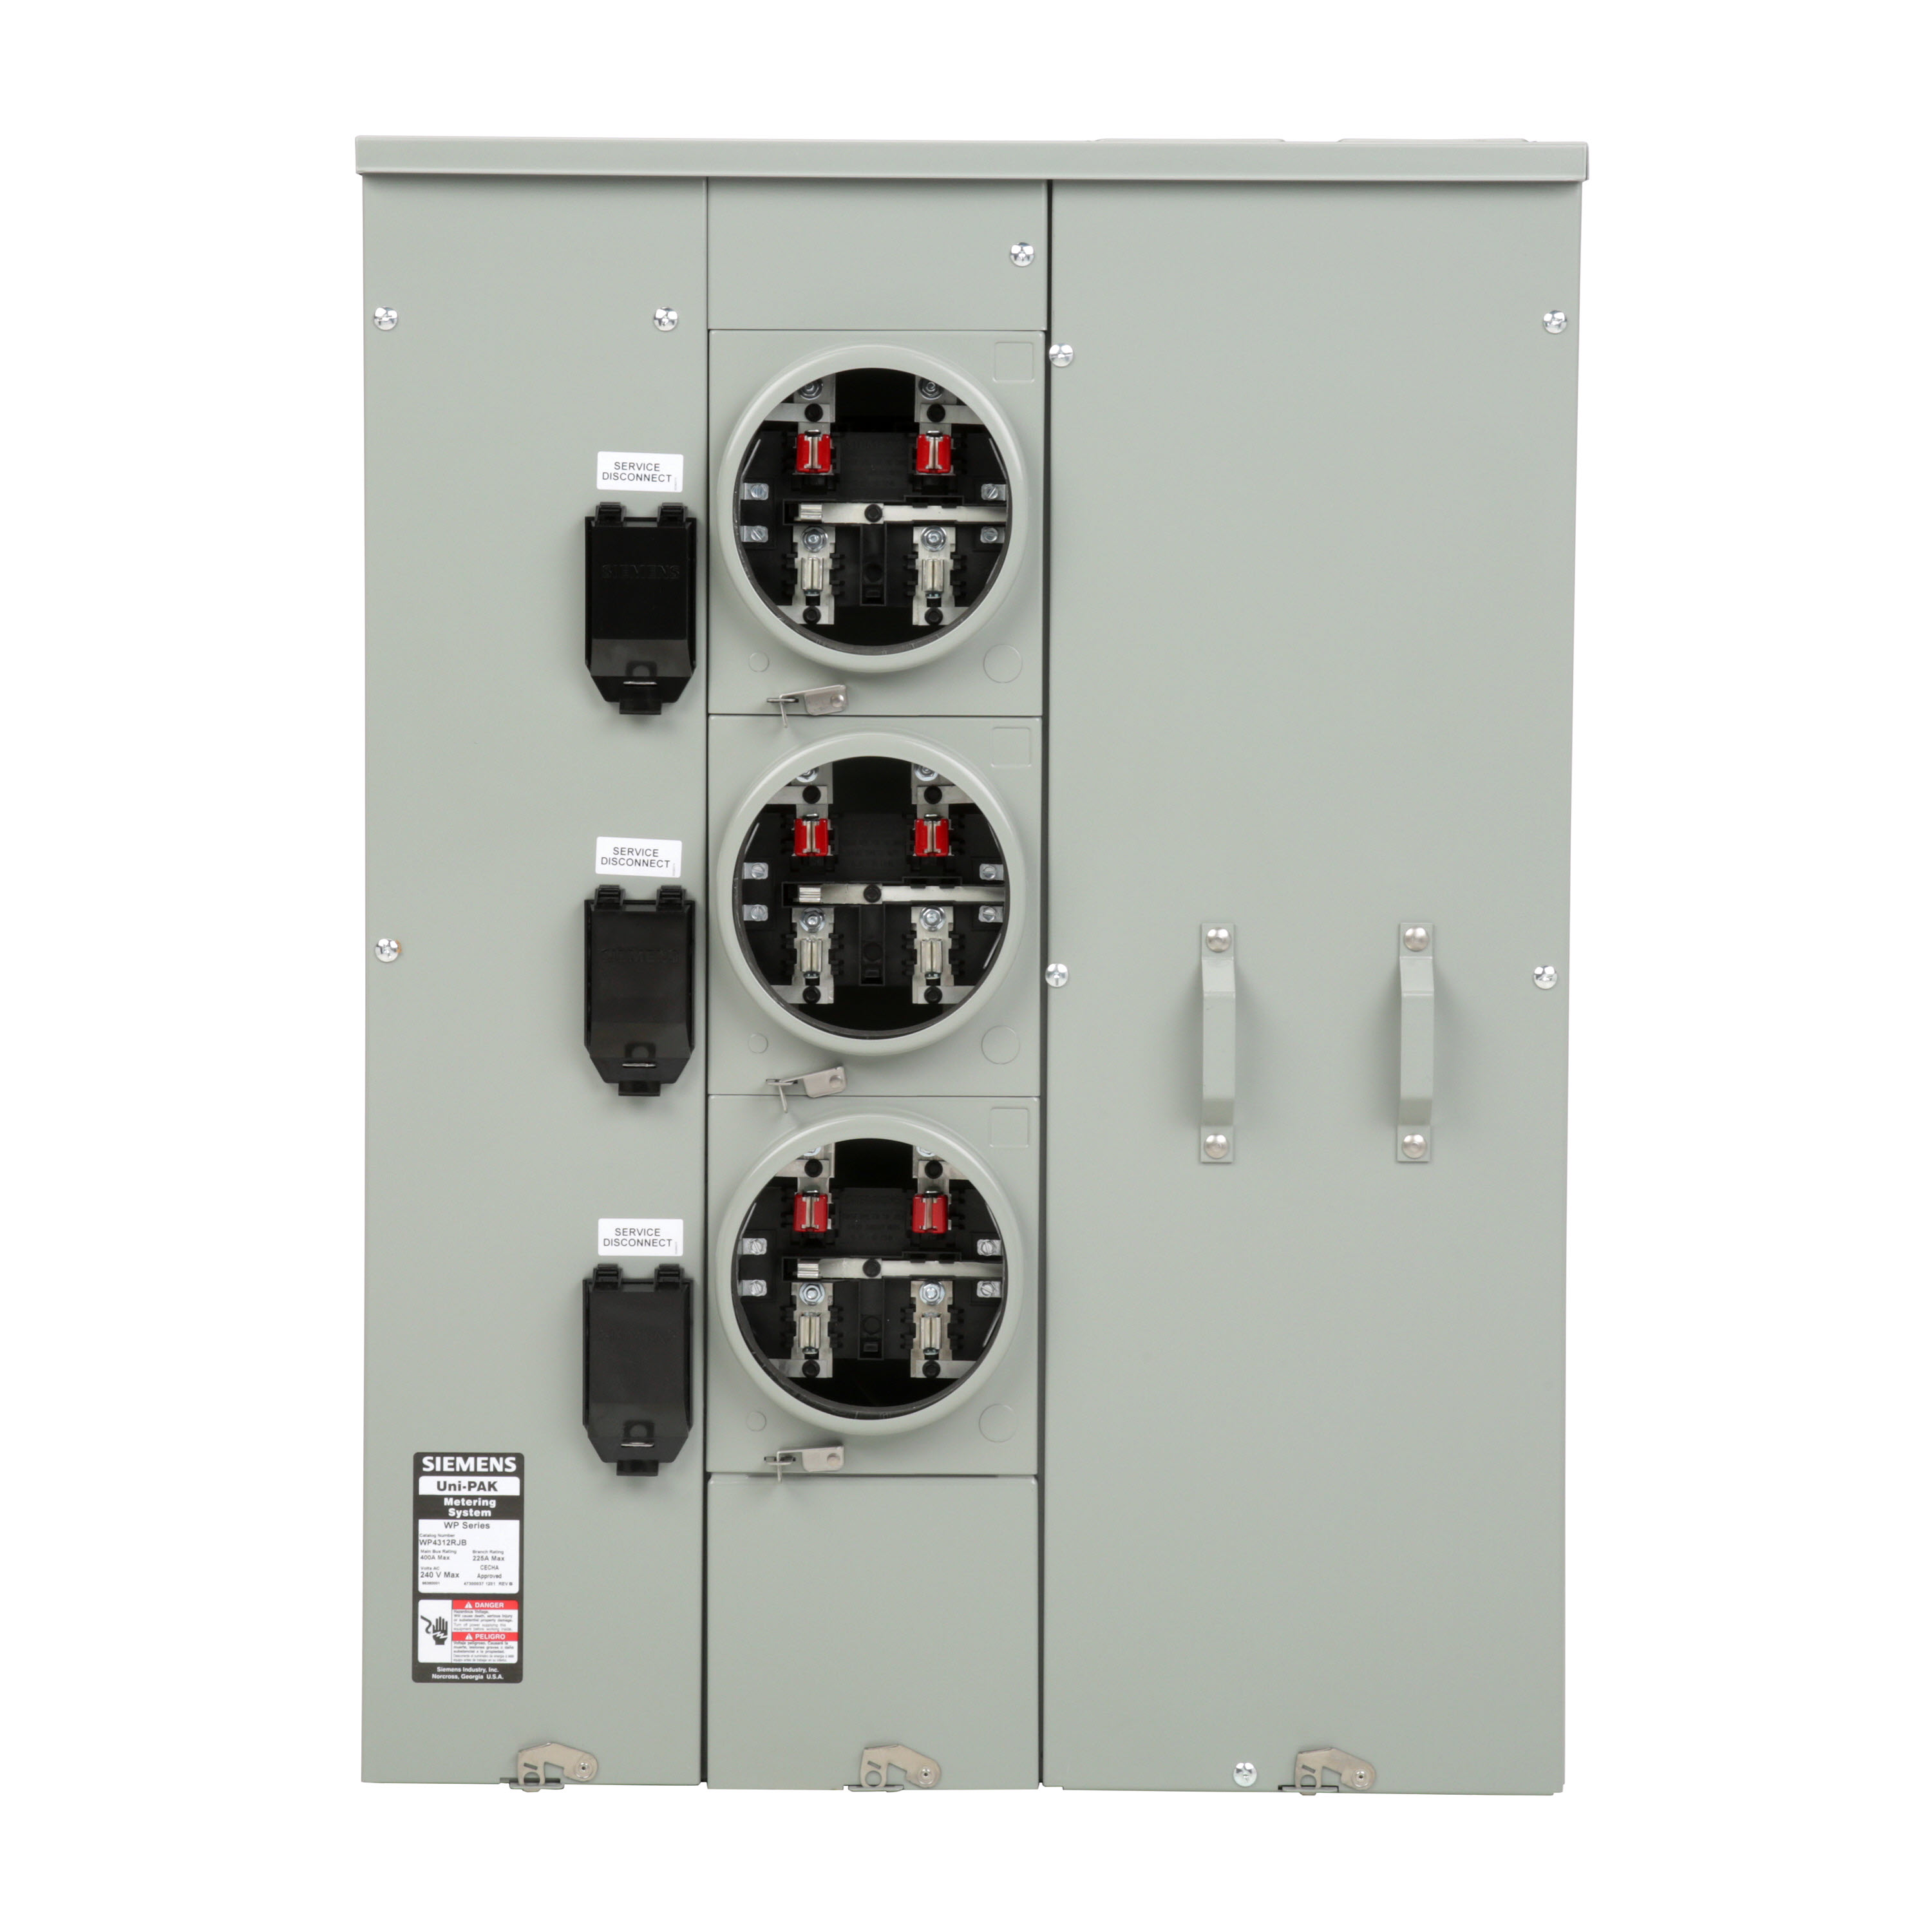 Siemens Low Voltage s Multi-Family Metering Line of PAK Metering Standard 225A as part of the PAK Metering Standard 225A Group. Type UNI-PAK Features HORN BYPASS Appn GARDEN - STYLE Std UL-50,67,414 V. Rating 120/240V A. Rating 400A Phase 1PH Size 9.00 x 28.79 x 39.630 No. Of Cutouts 11 Cutout Size 1 x (1/2,3/4,1,1-1/4 ), 6 x (2-1/2,2 ,1-1/2,1-1/4,1 ), 2 x (4,3-1/2,3,2-1/2,2 ), 2X4 Cable Entry TOP OR BOTTOM FEED Terminal 3X2 STUDS. Insulated.Appn . Wall Mounted. Enclosure RINGLESS